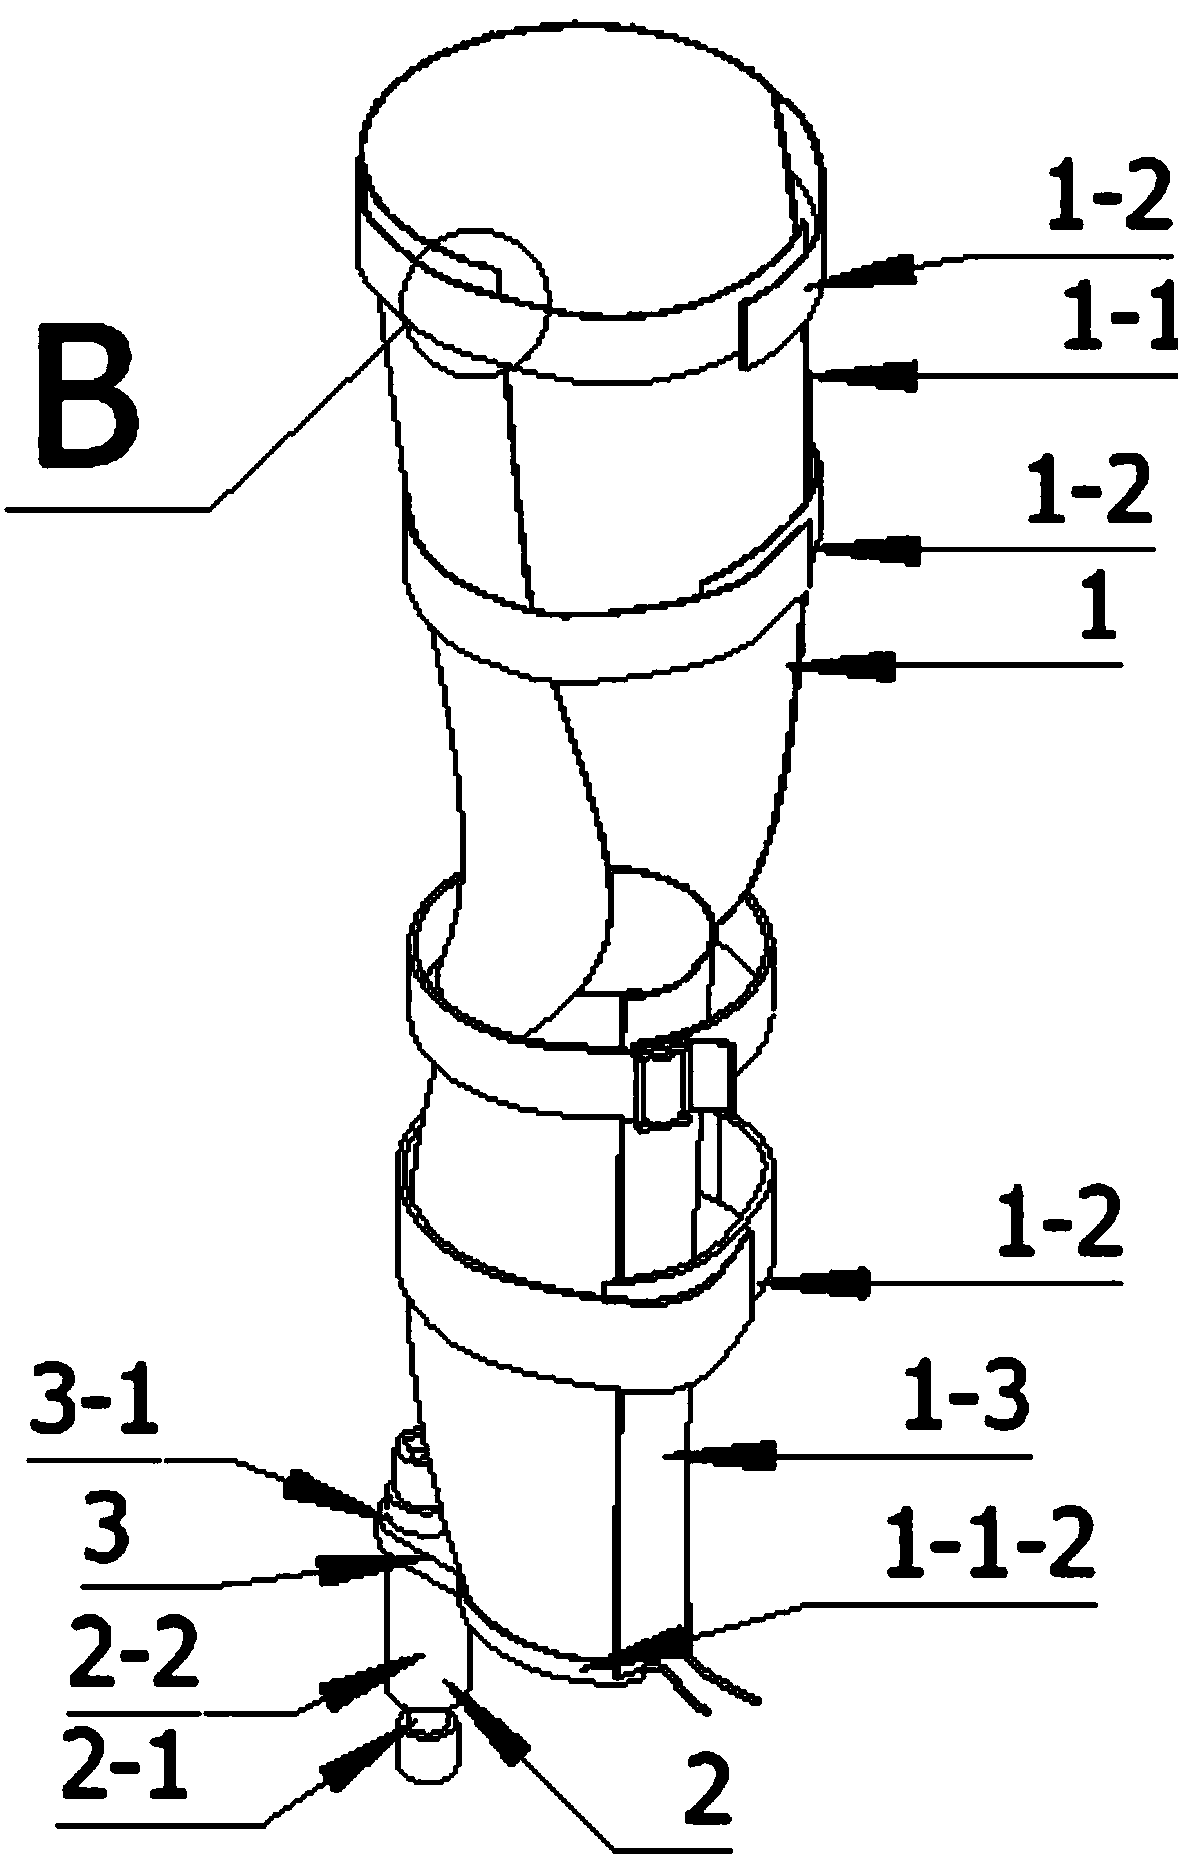 Universal standing supporting device